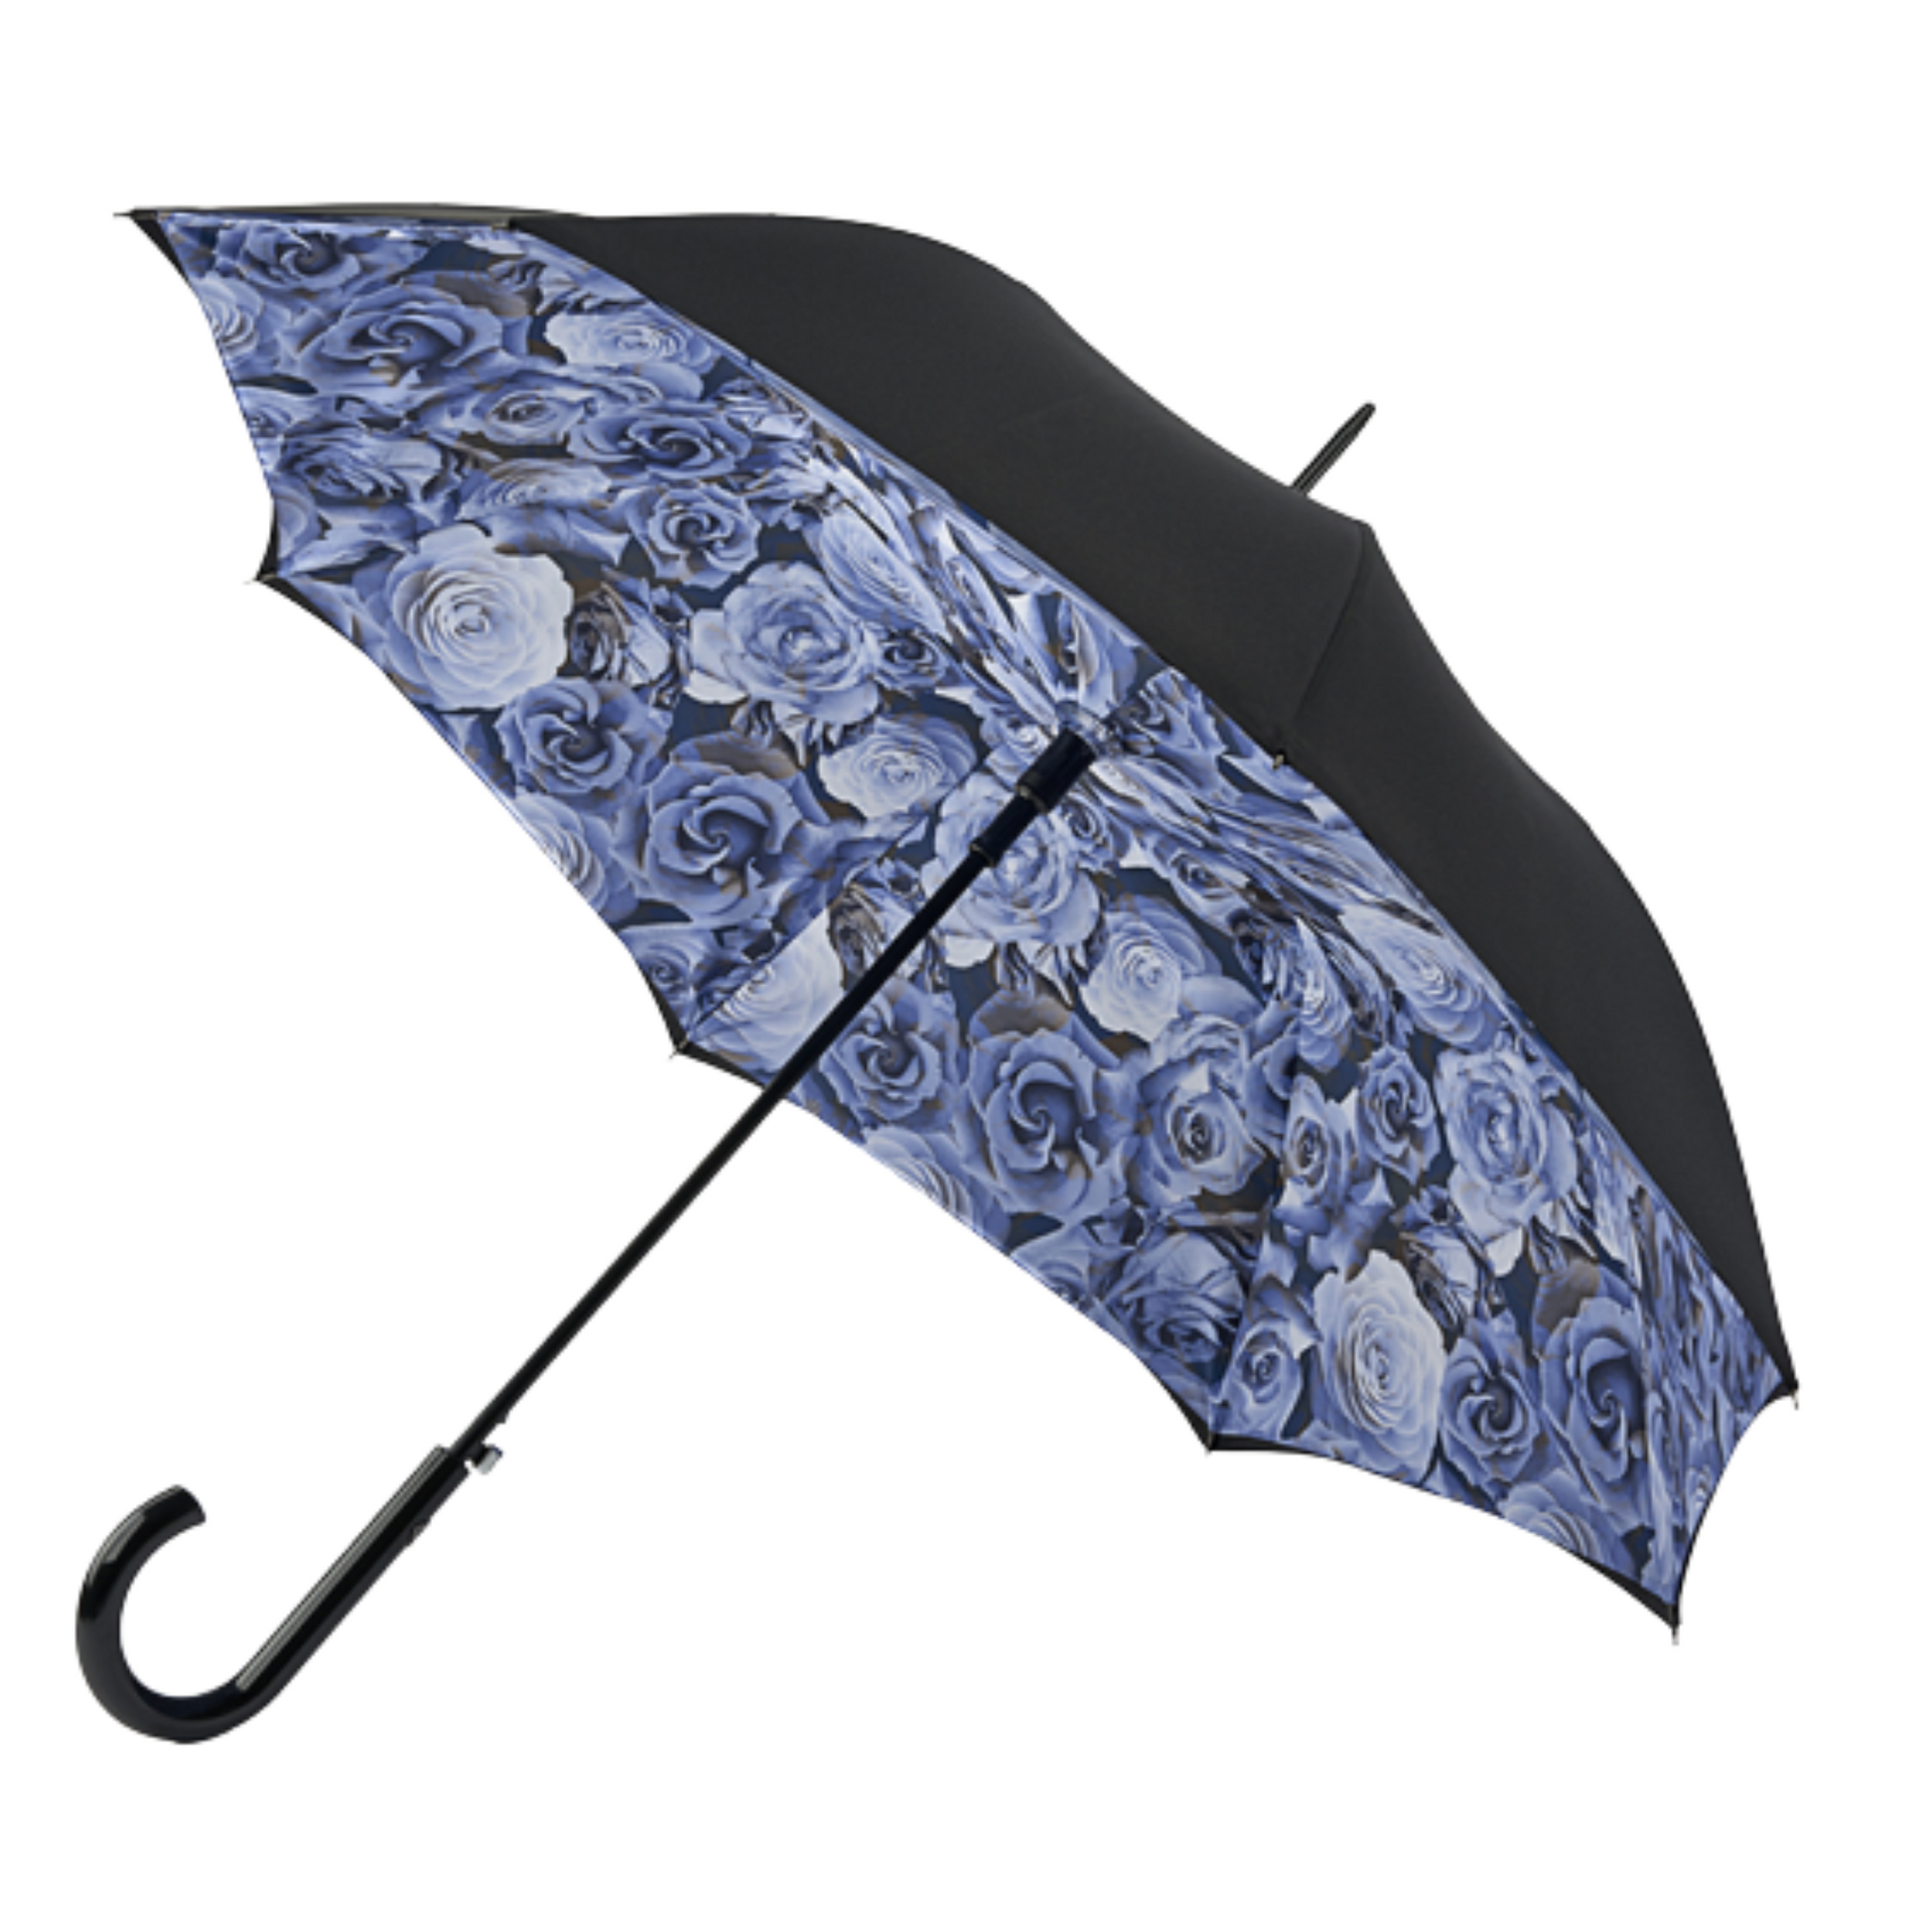 A photo of the Fulton Bloomsbury2 in the colour Liquid Rose. Showing the handle and the view of the umbrella when it is open.